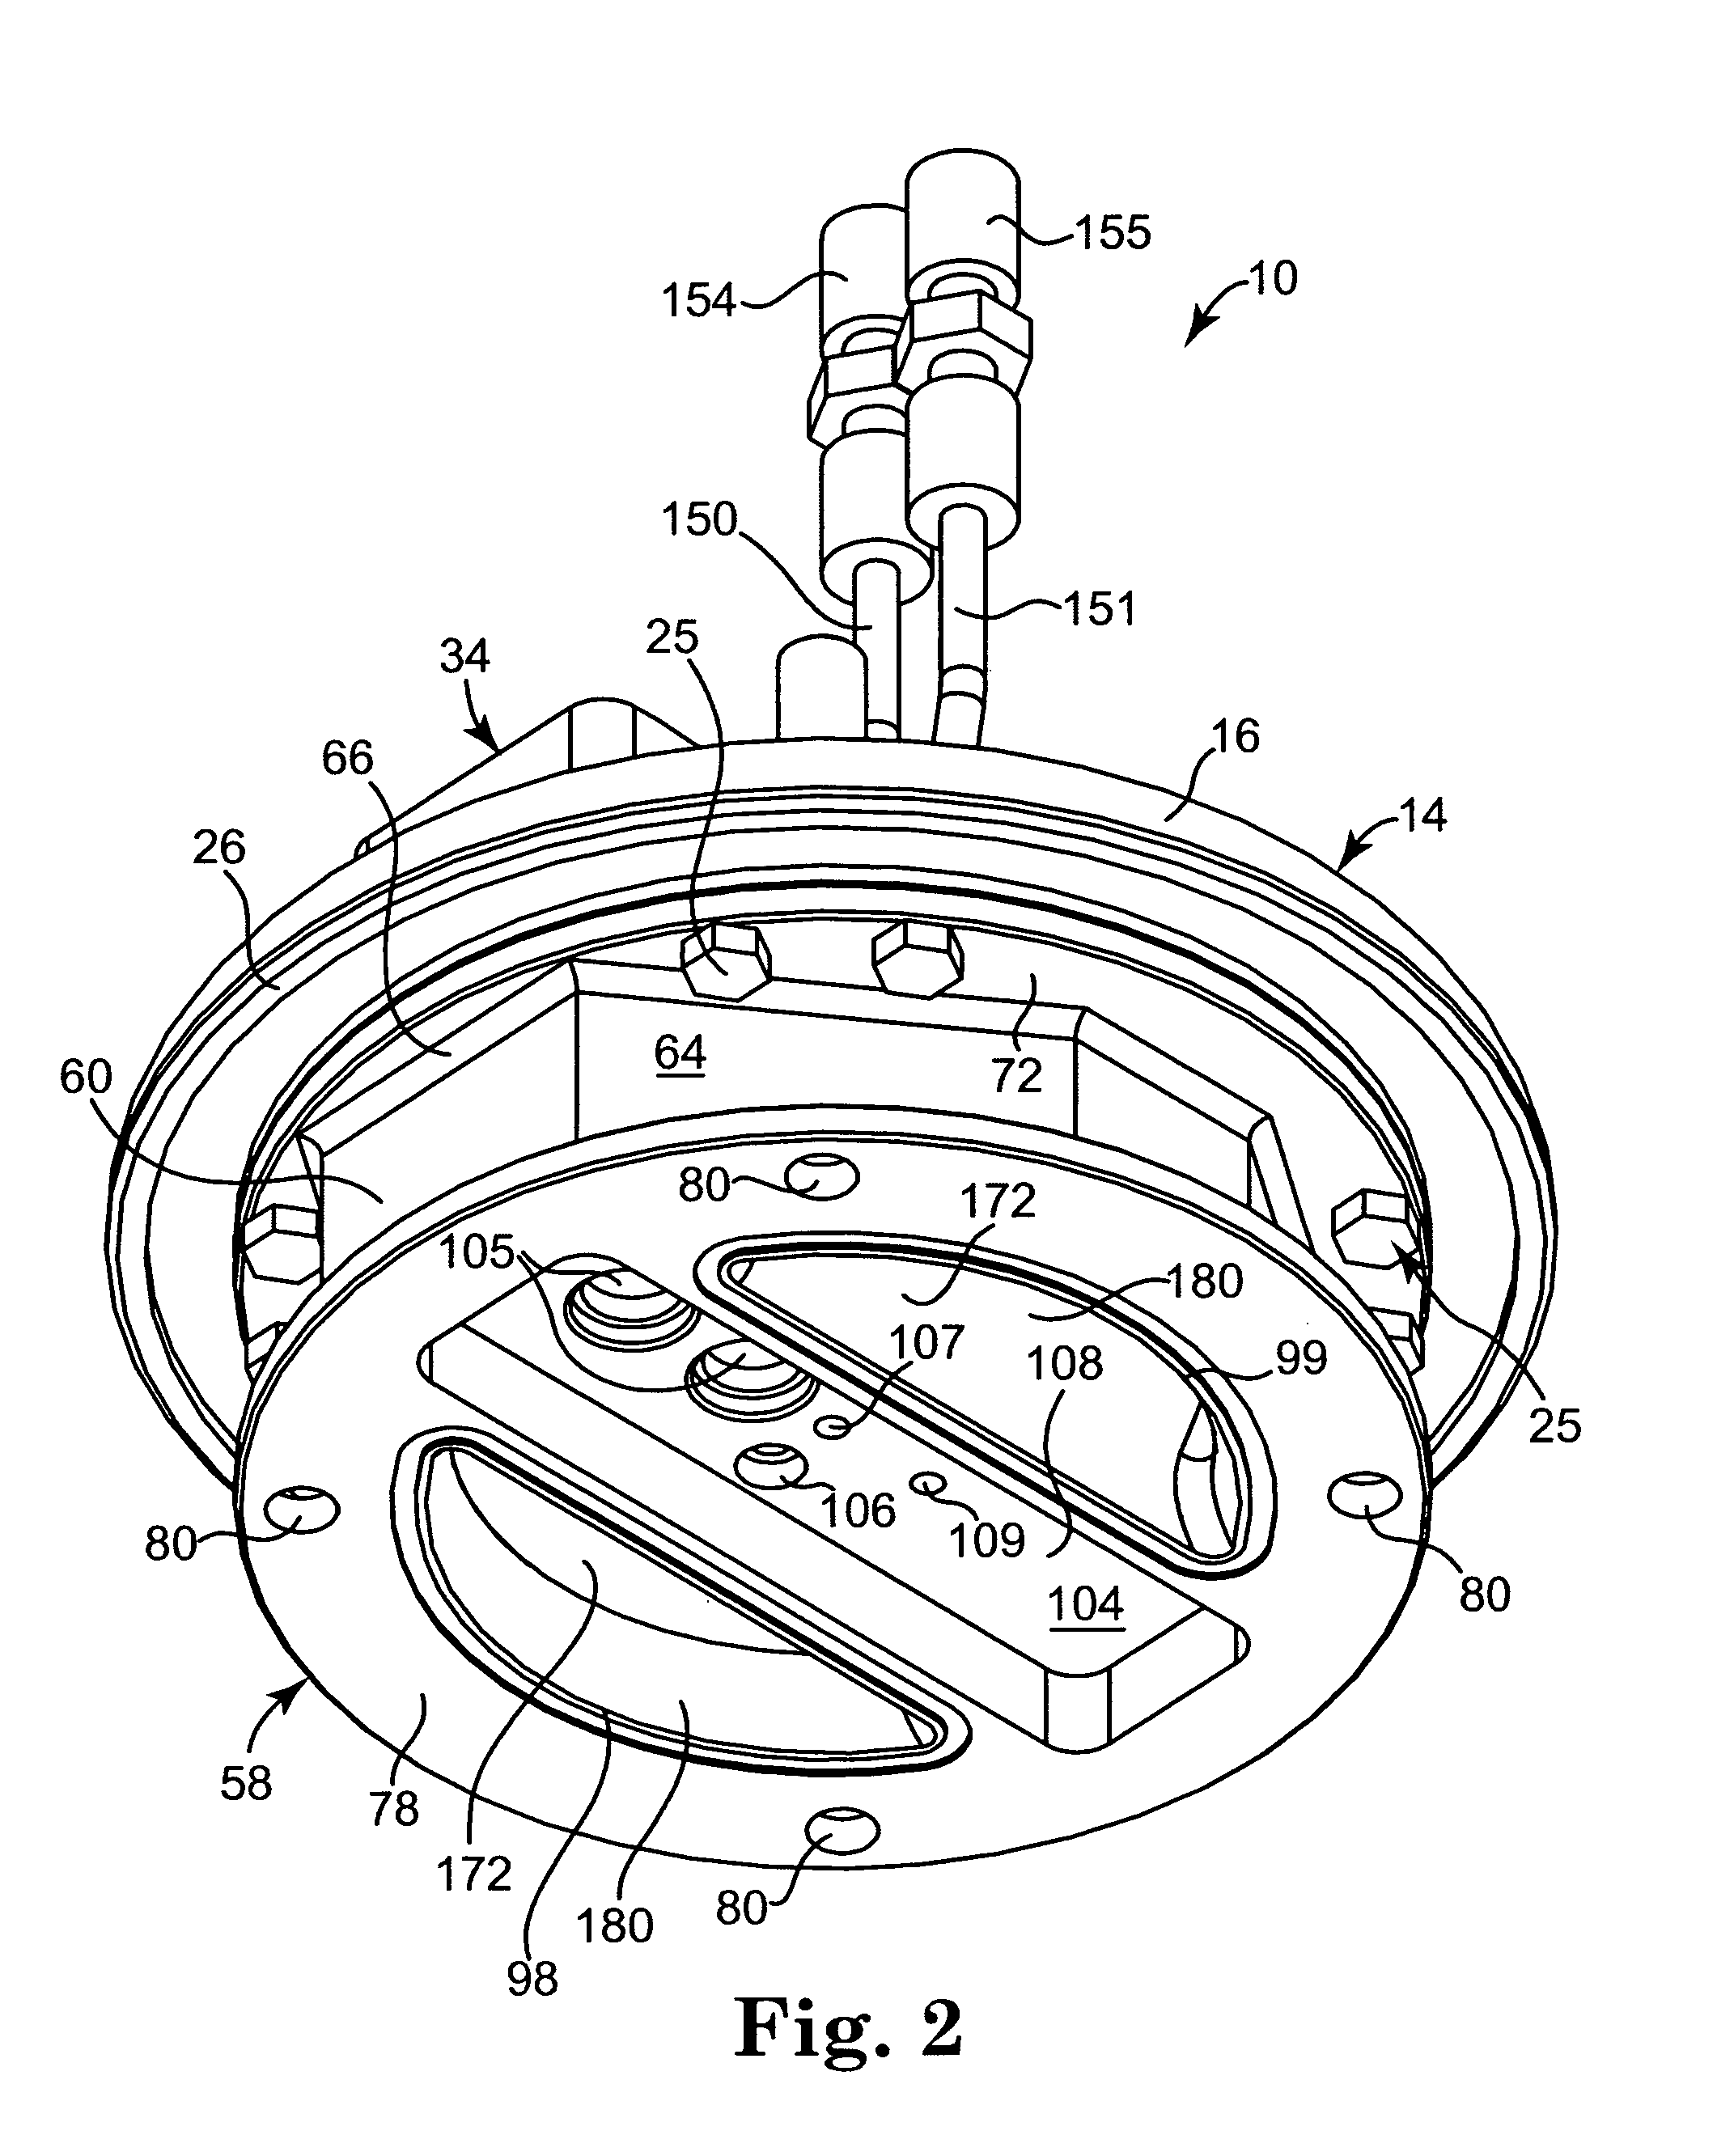 Rinsing methodologies for barrier plate and venturi containment systems in tools used to process microelectronic workpieces with one or more treatment fluids, and related apparatuses